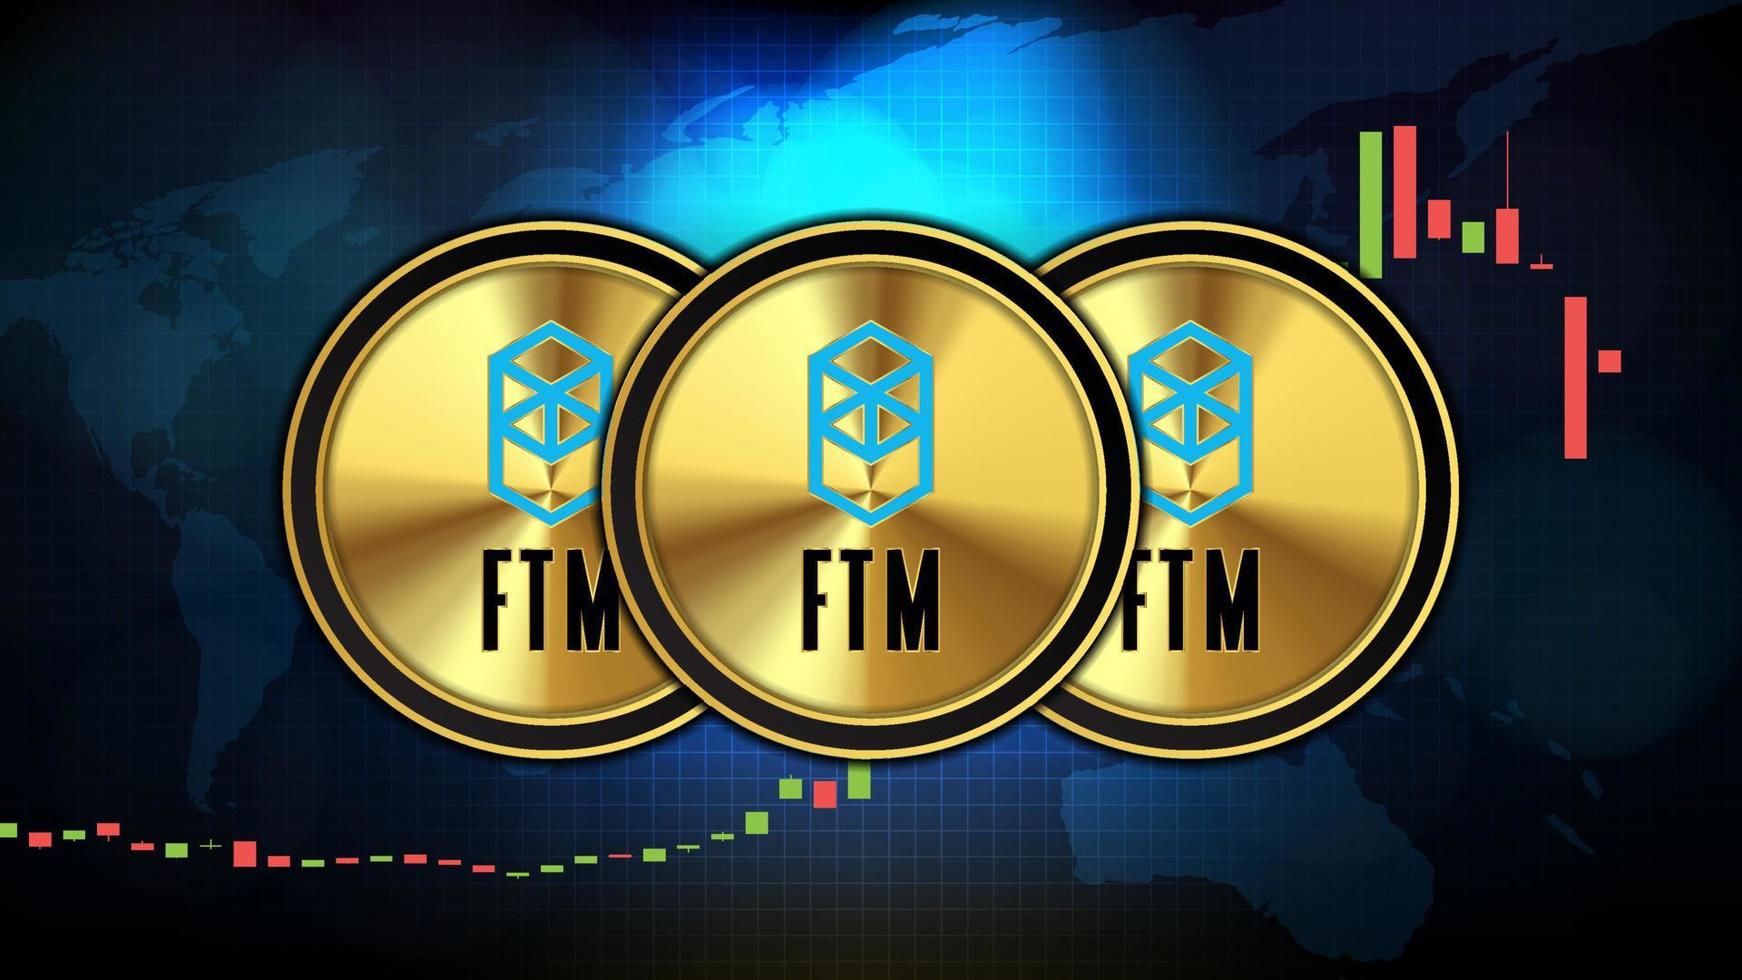 abstract futuristic technology background of Fantom FTM Price graph Chart coin digital cryptocurrency vector